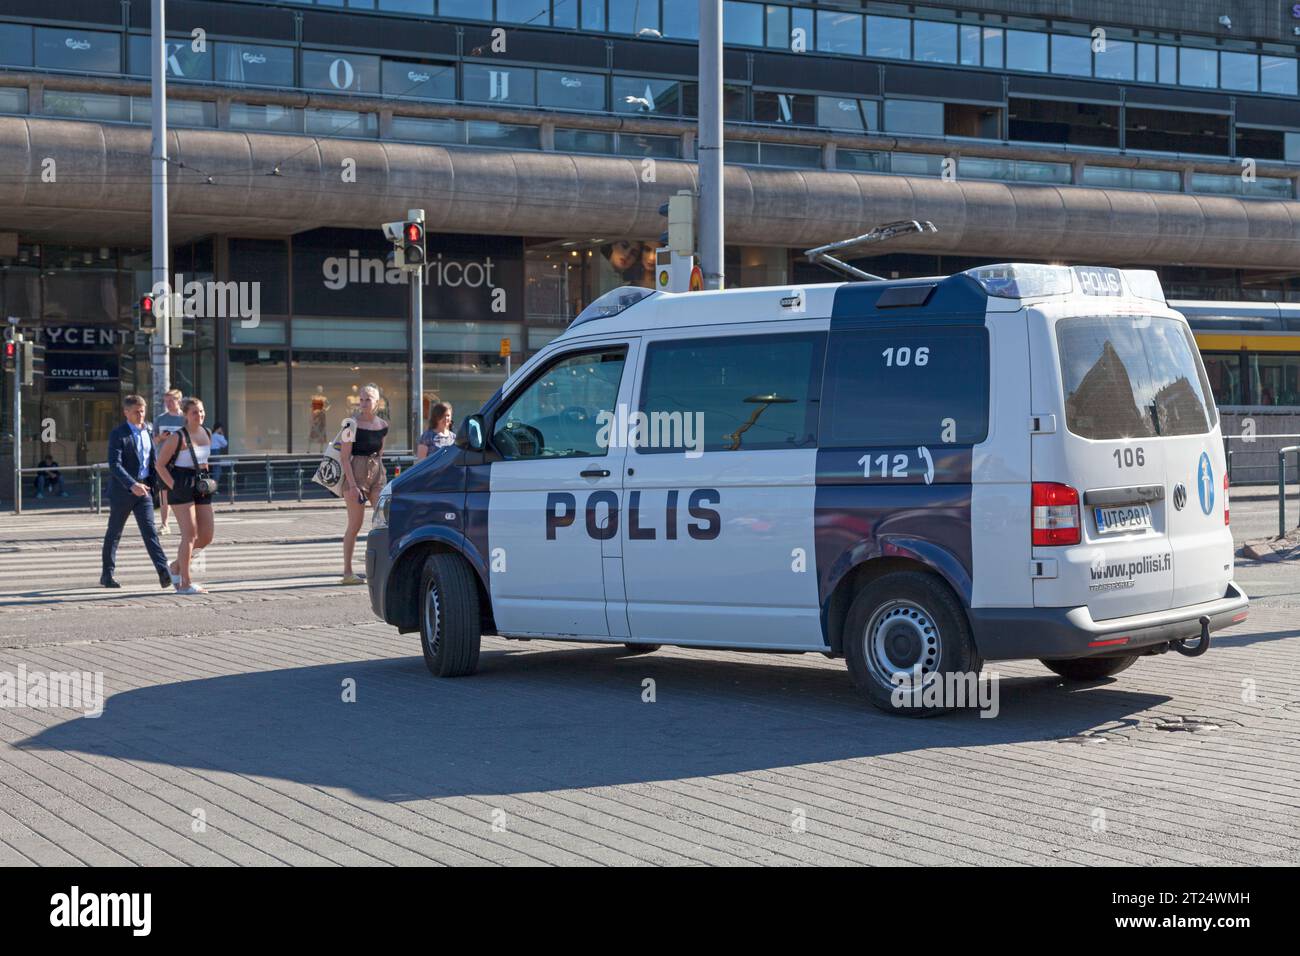 Helsinki, Finland - June 19 2019: Police van patrolling the streets in the city center. Stock Photo